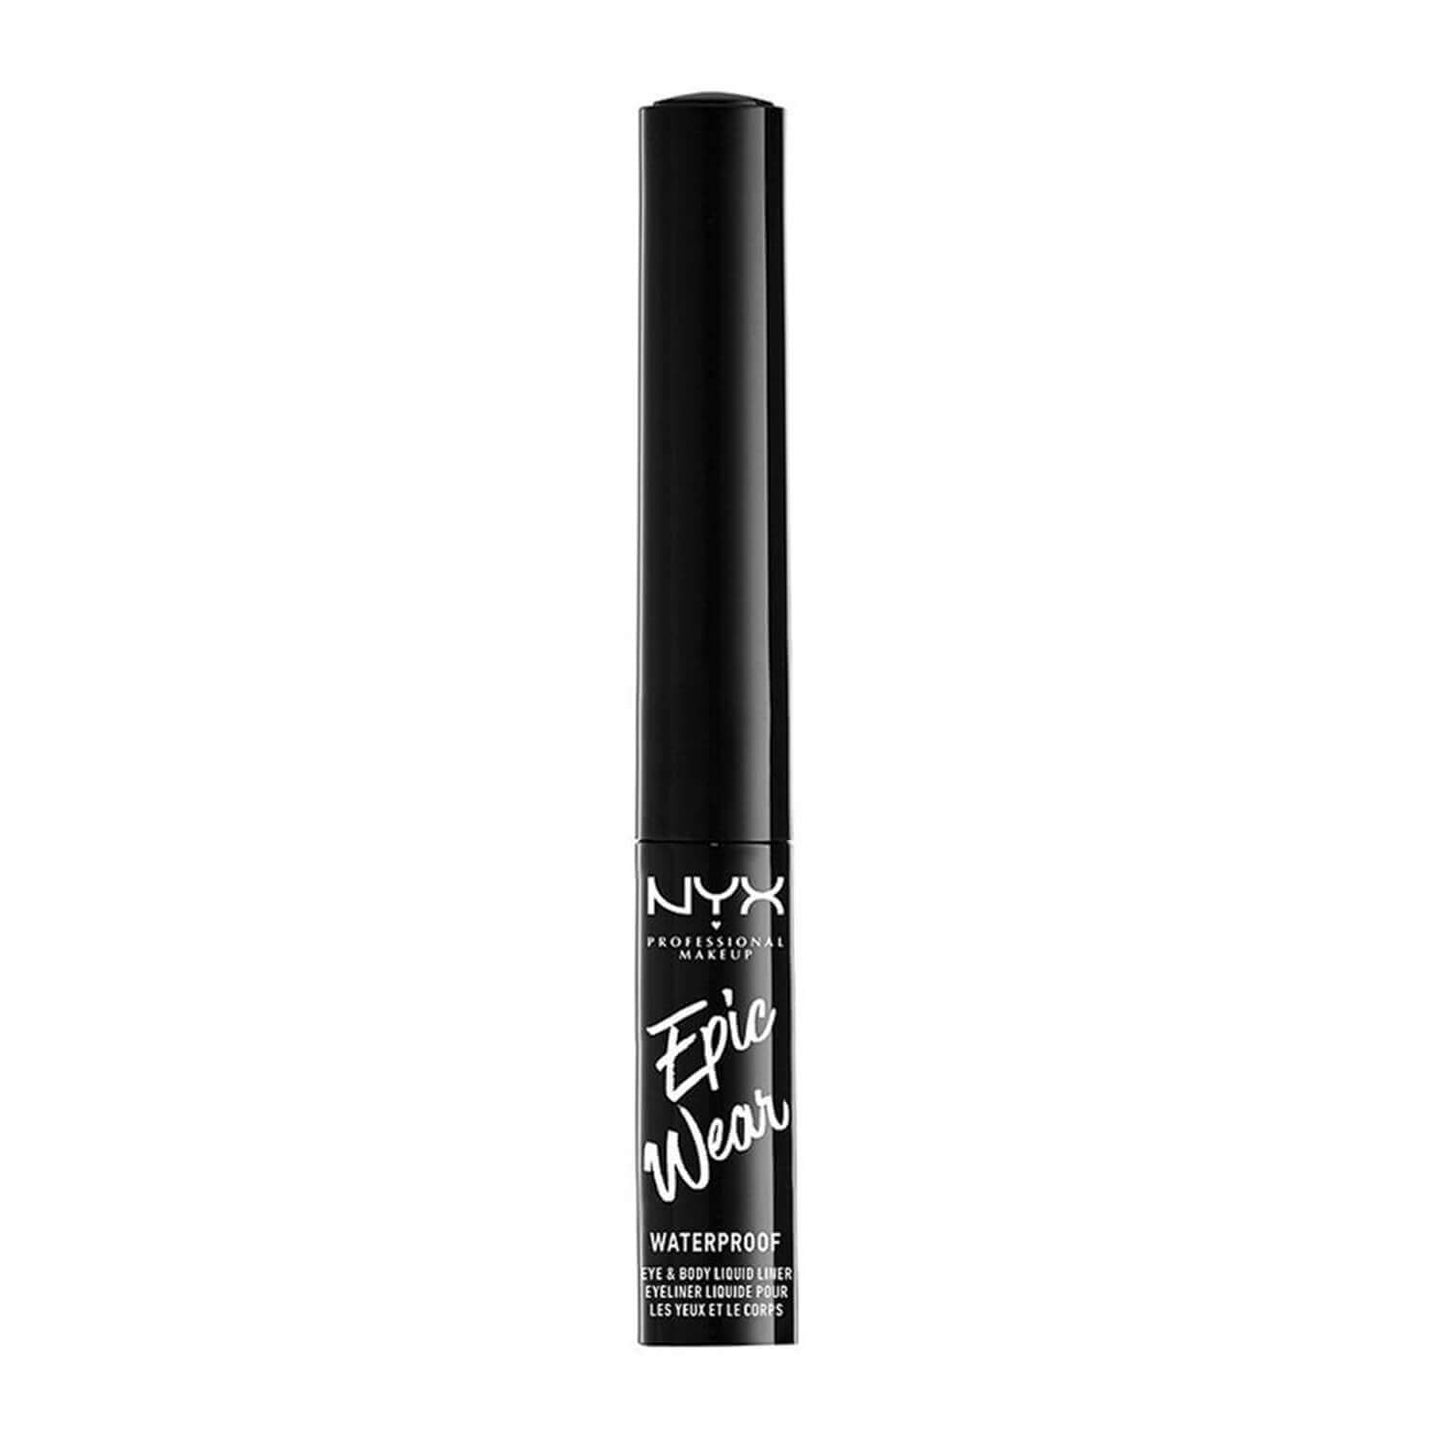 NYX Epic Wear Long Lasting Matte Liquid Eyeliner available at Heygirl.pk for delivery in Karachi, Lahore, Islamabad across Pakistan. 